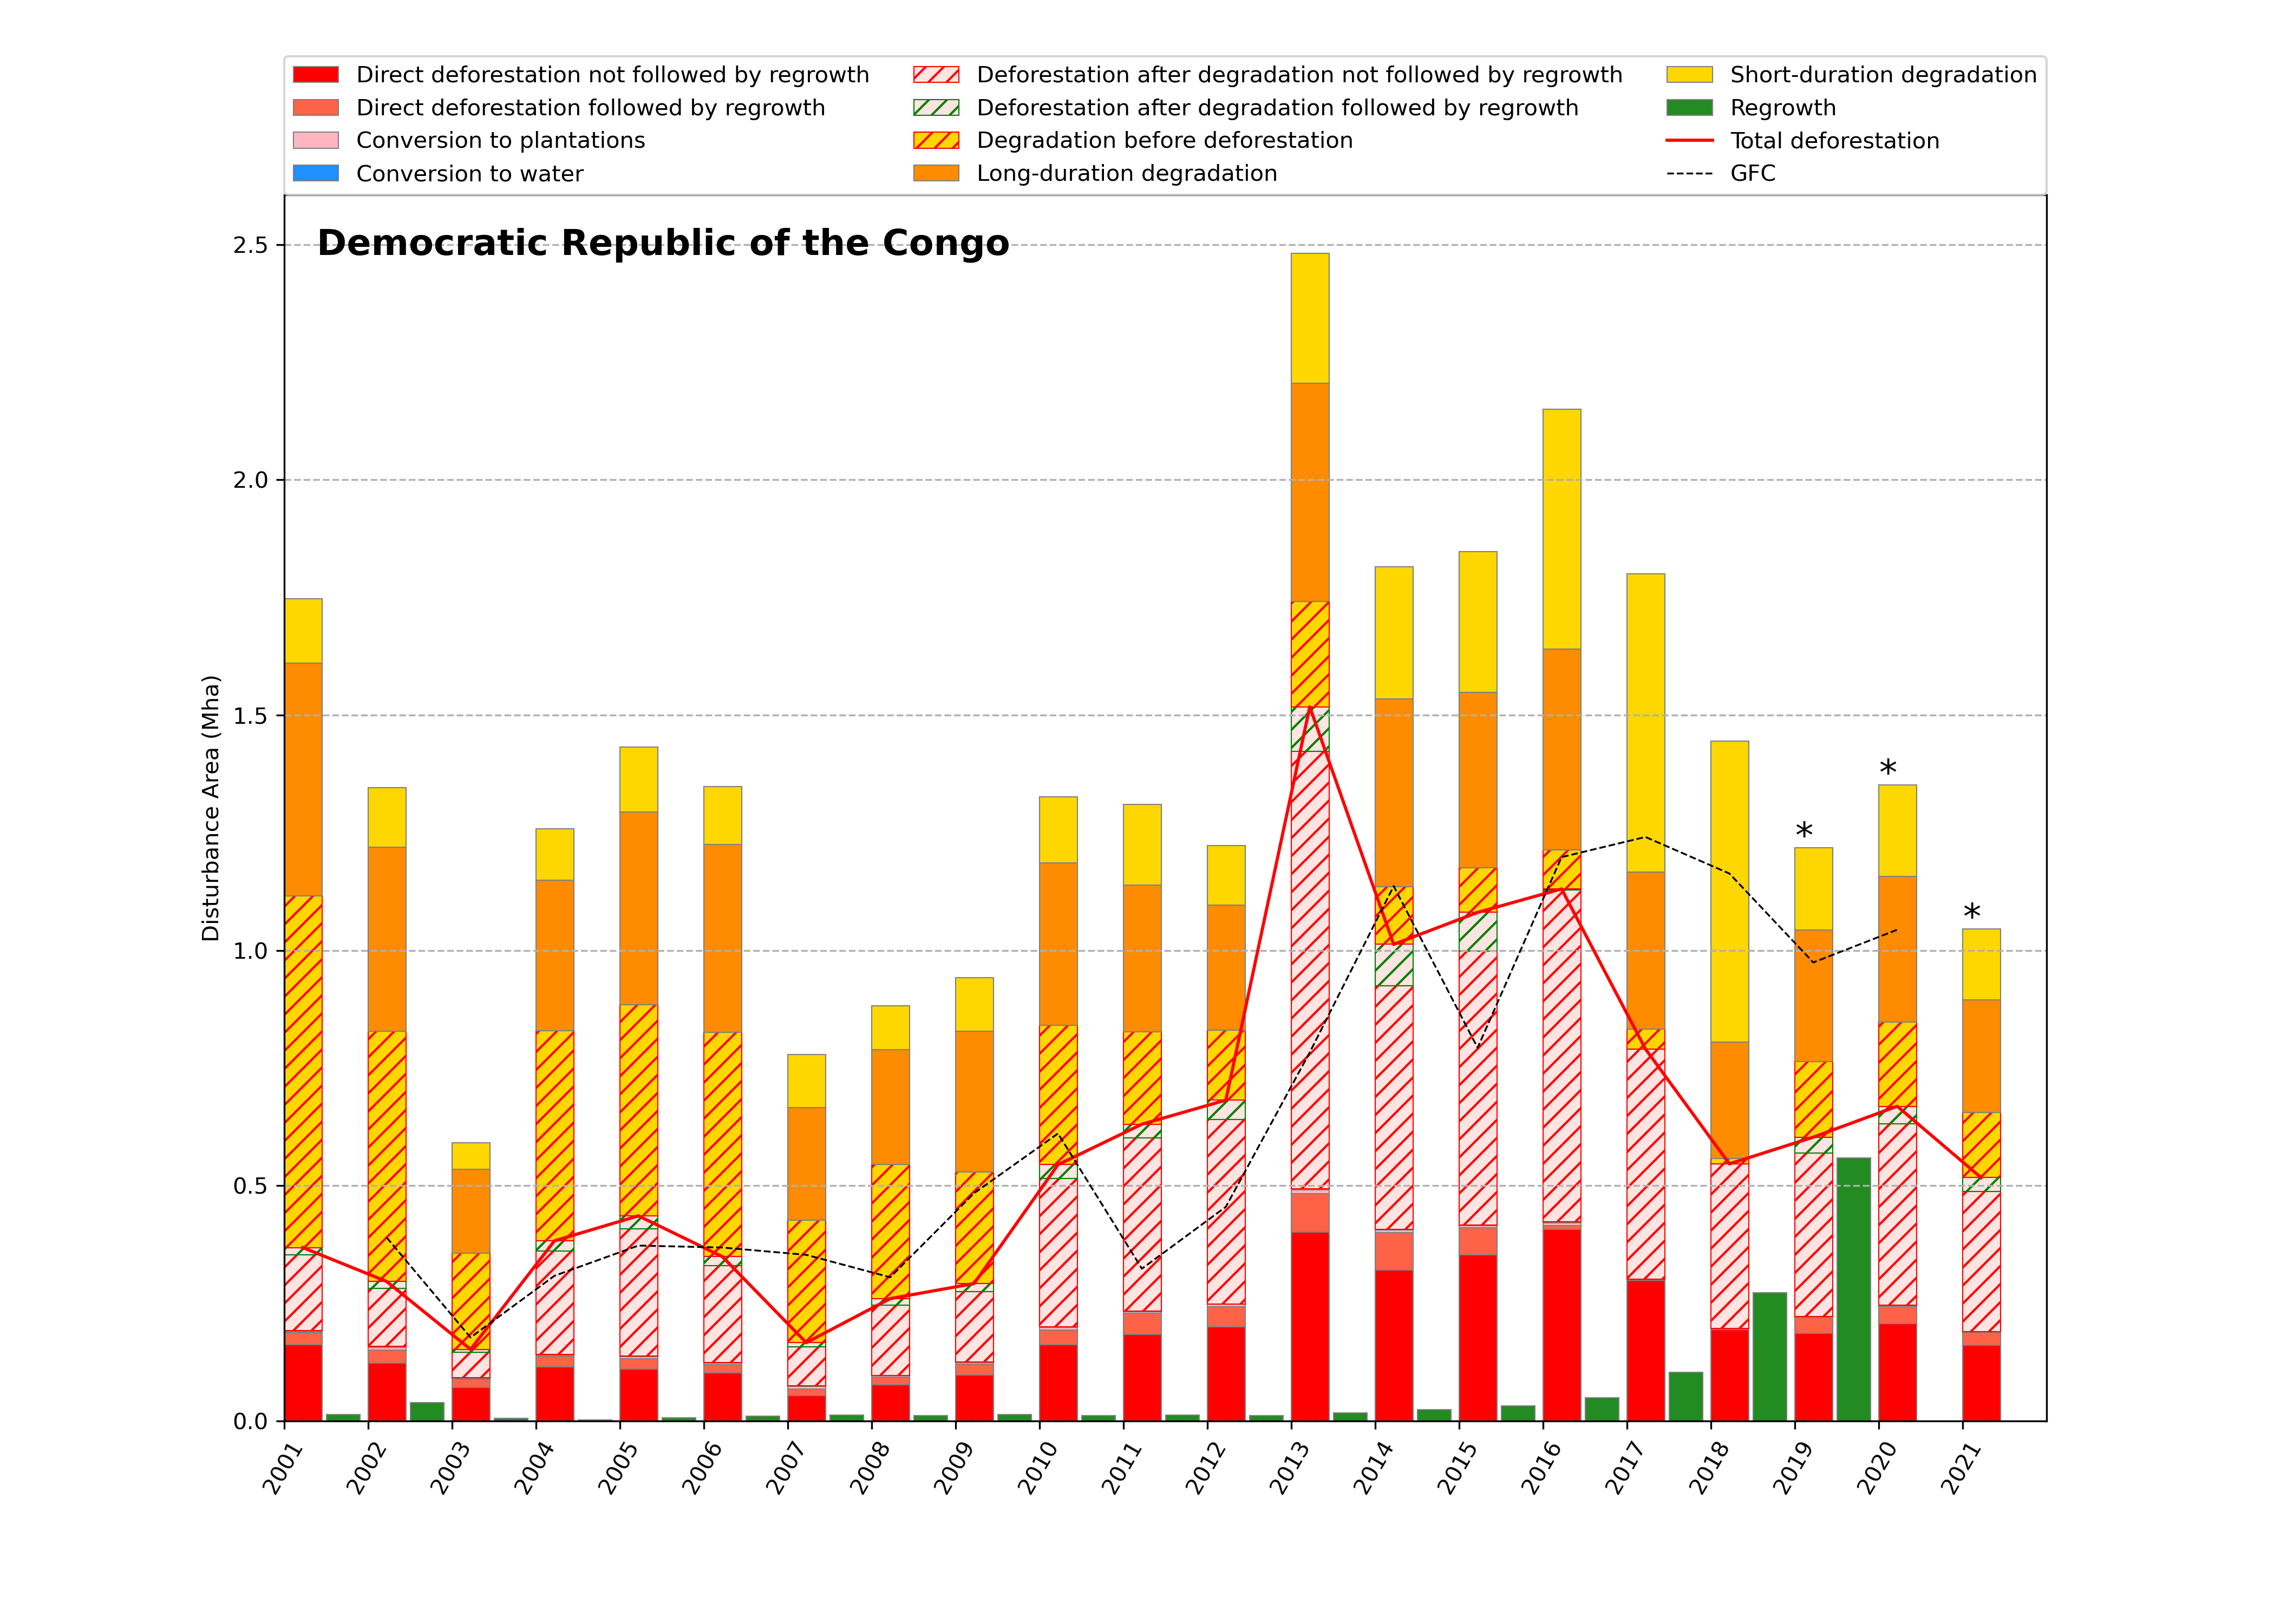 Annual deforestation and degradation in the DRC from 2001 - 2021